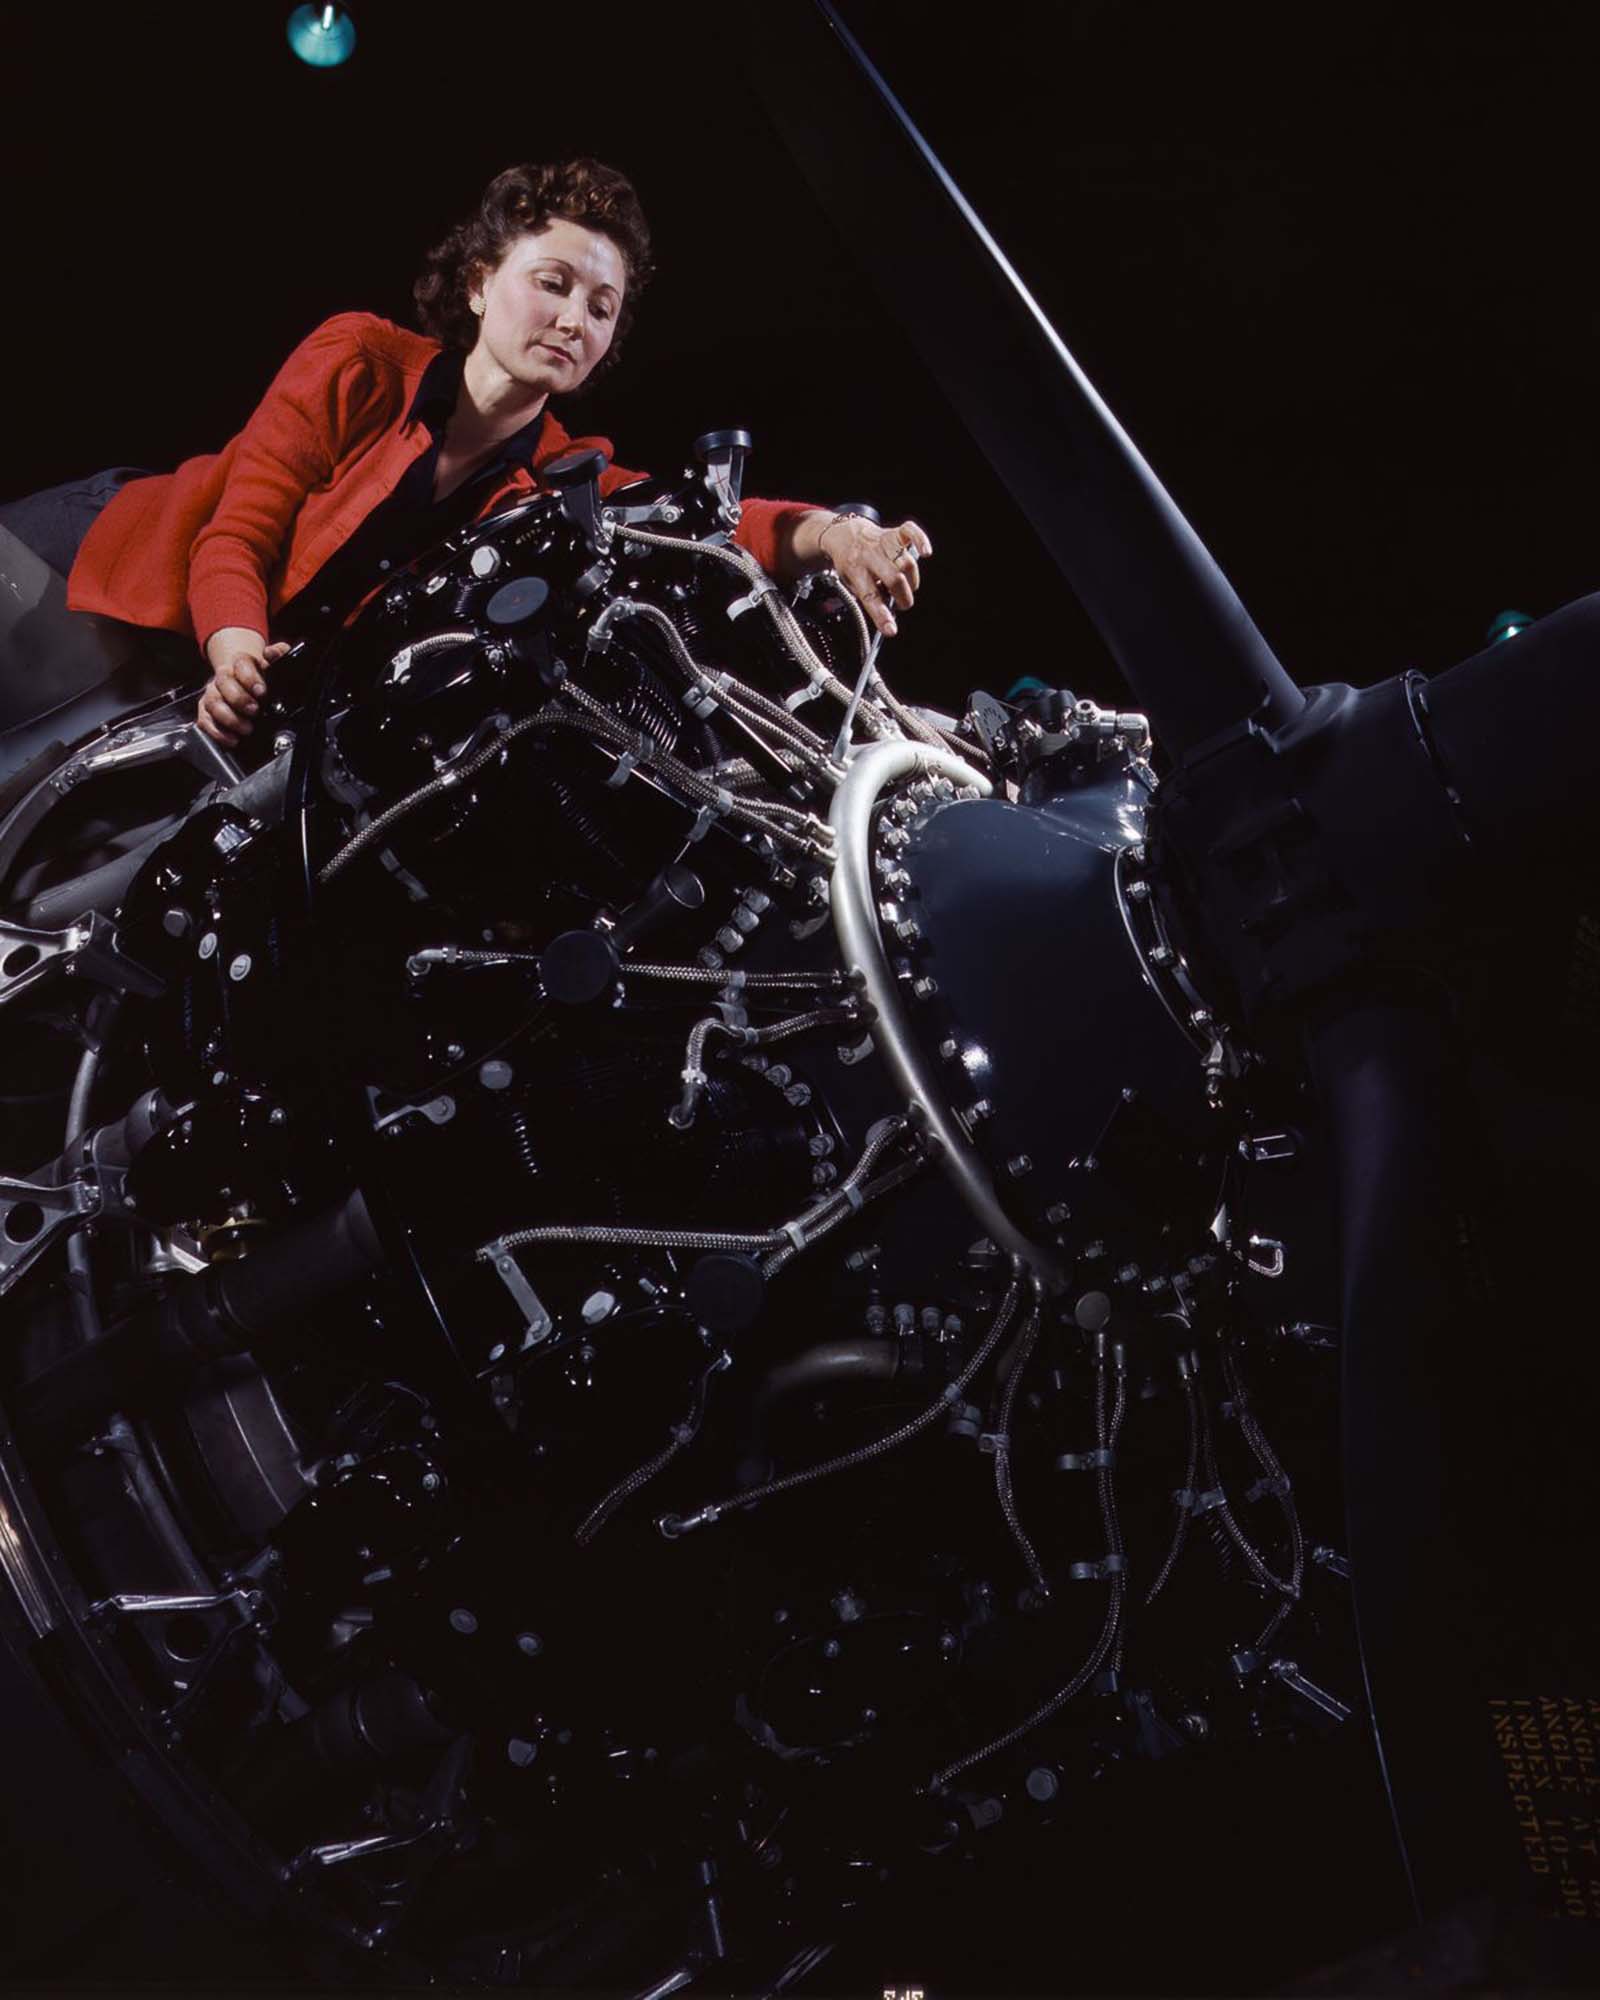 A worker makes adjustments to an airplane motor at the Douglas Aircraft Company plant in Long Beach, California, 1942.